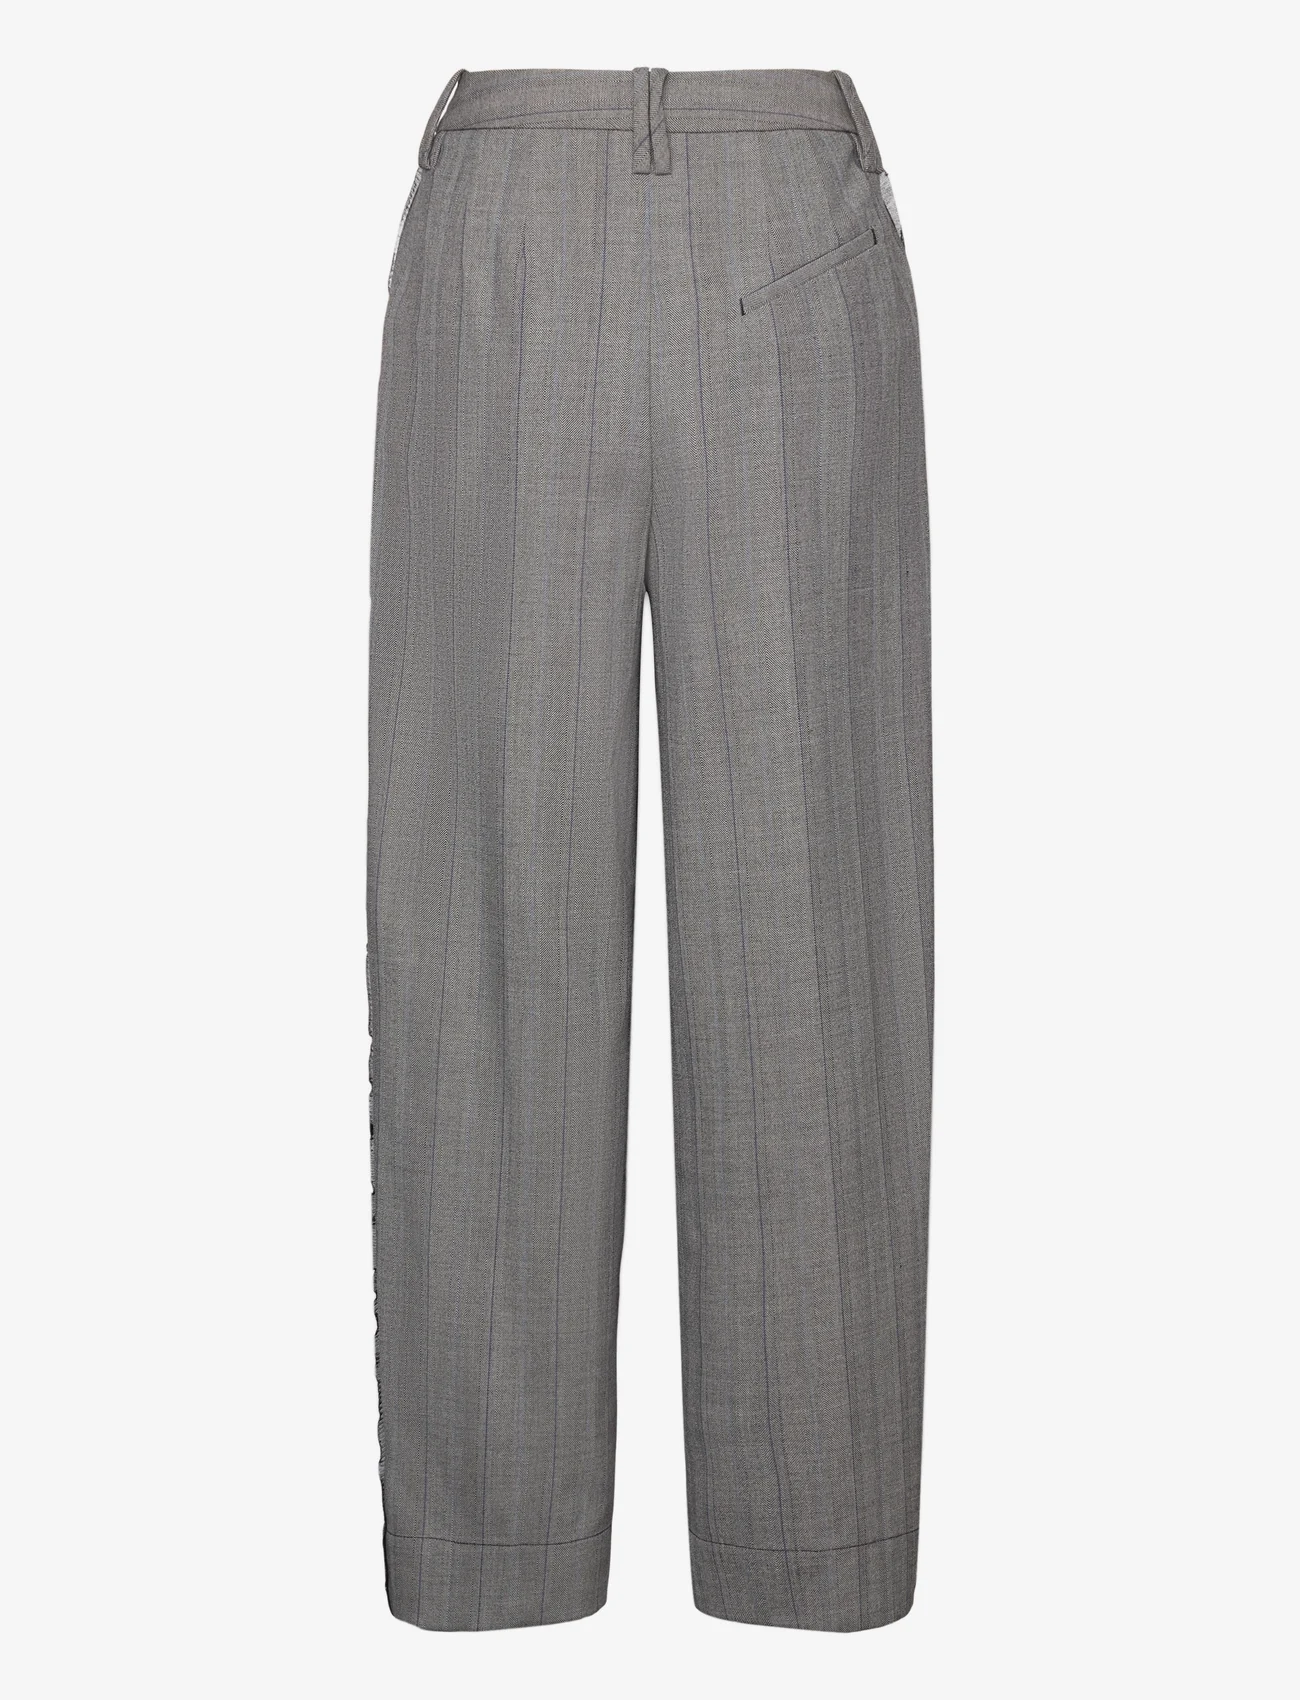 Ganni - Herringbone Suiting - formell - frost gray - 1